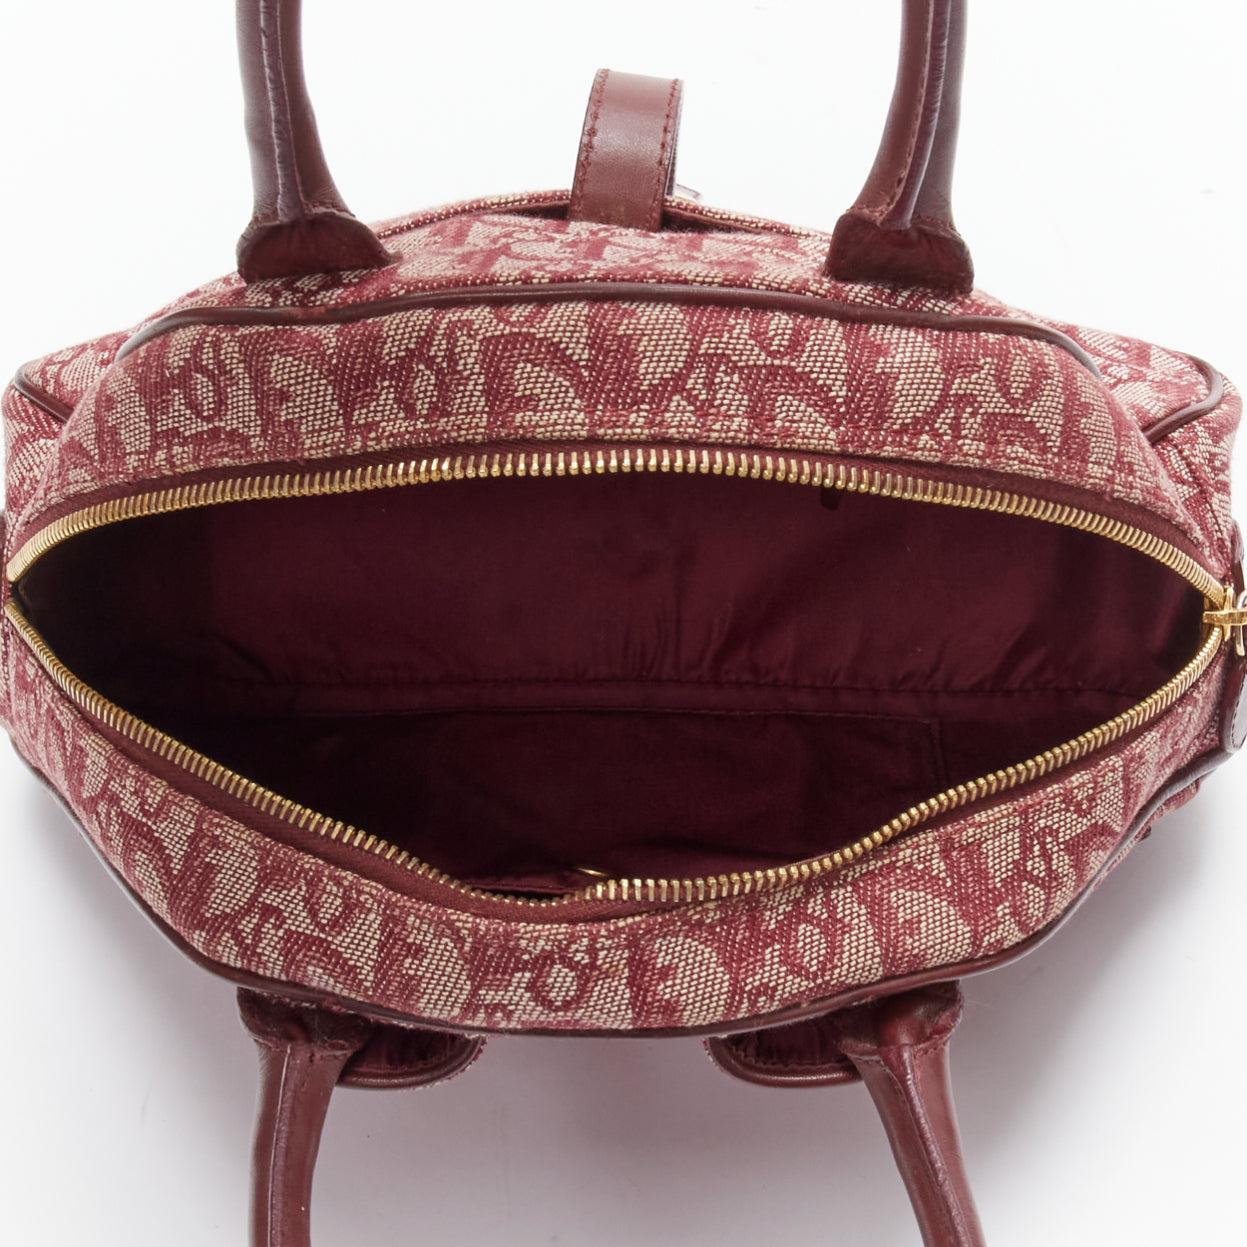 CHRISTIAN DIOR Galliano Vintage Double Saddle Trotter red monogram bag For Sale 4